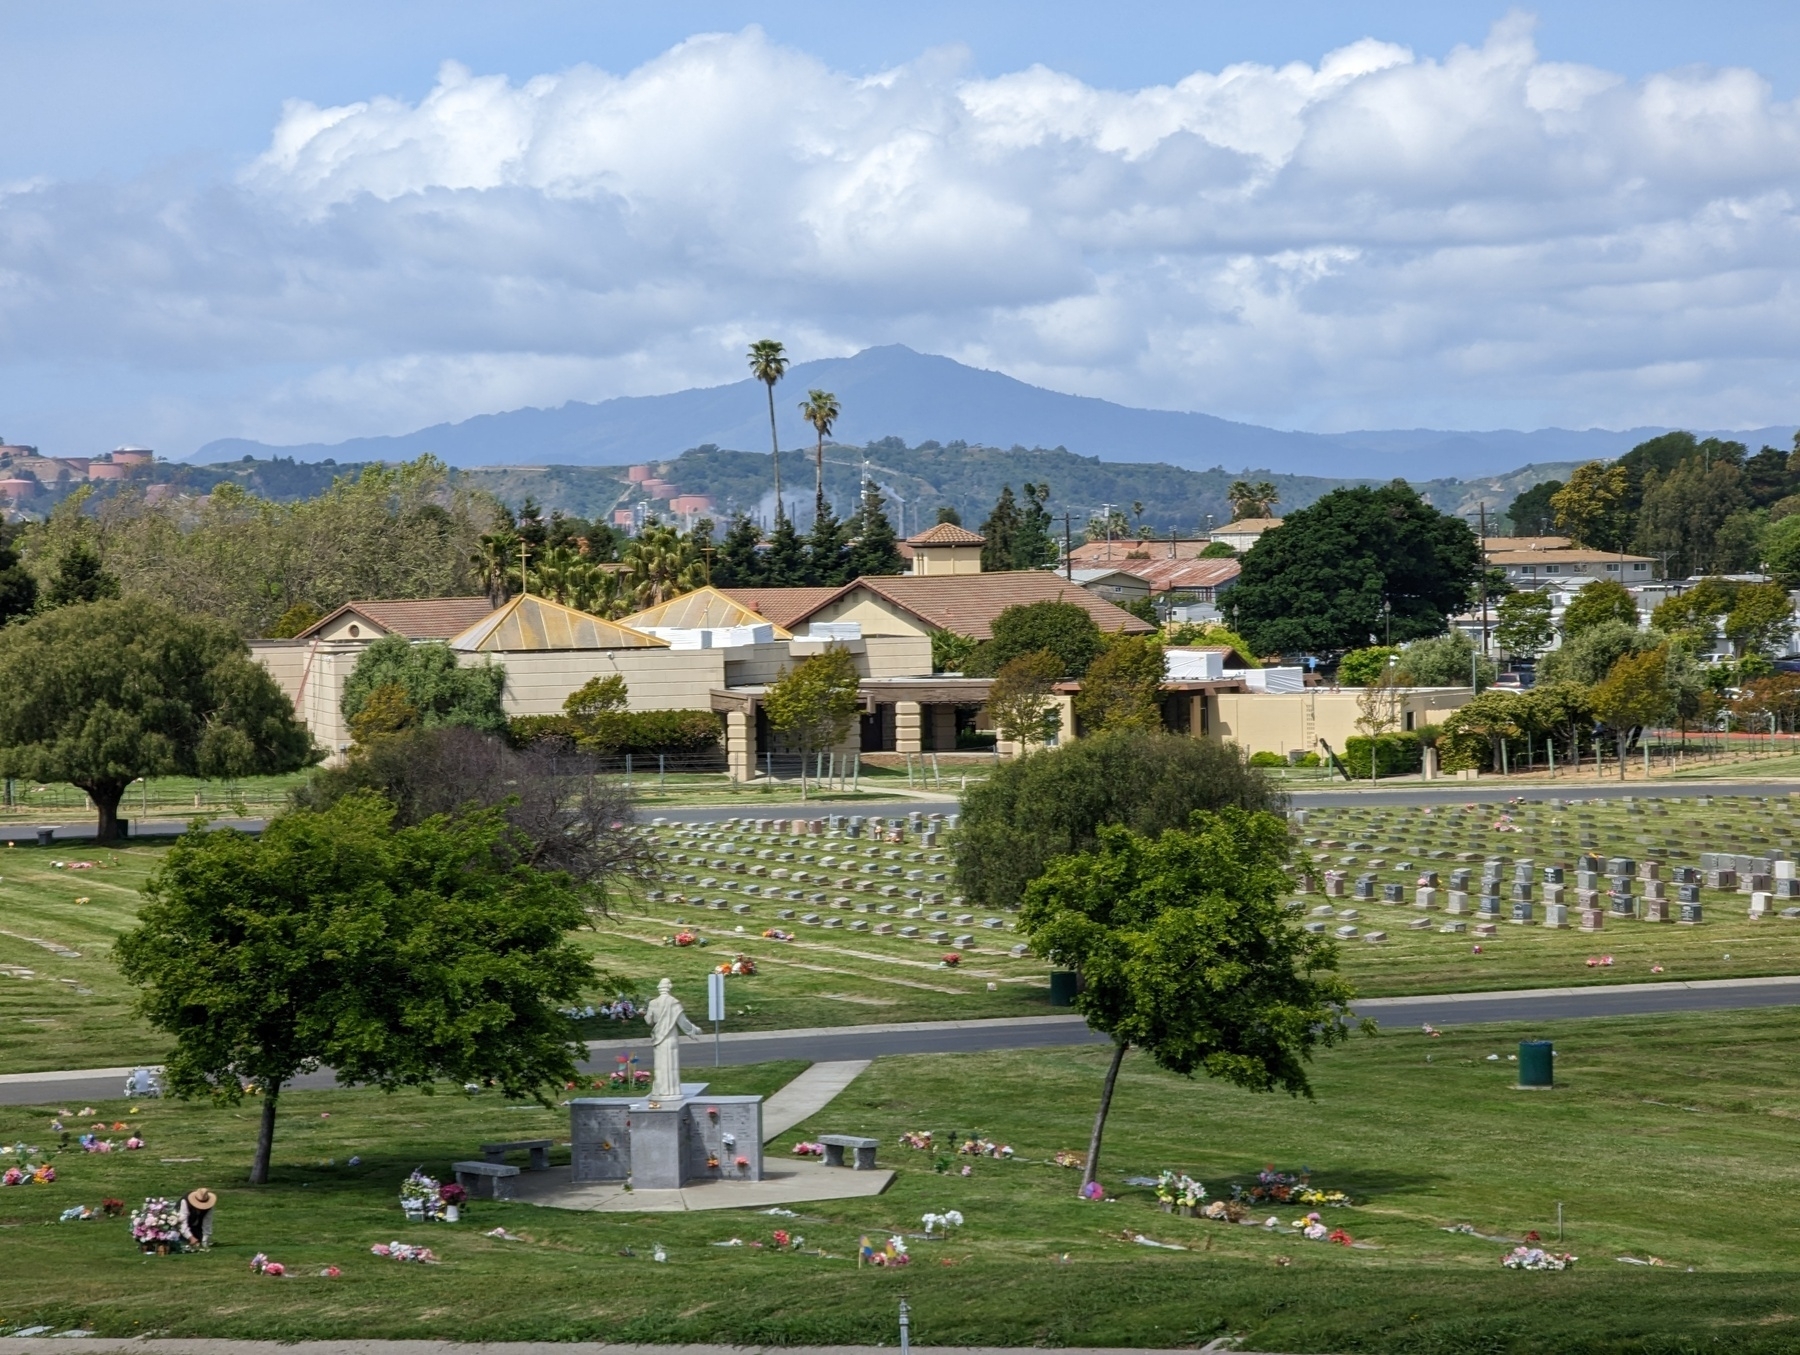 A zoomed in (4x magnification) view facing west toward Mount Tamalpais from the top of a roadway winding through St. Joseph's Catholic cemetery on Church Road with rows of flower and flag adorned gravestones under partly sunny skies Tuesday May 9, 2023 in San Pablo, California.